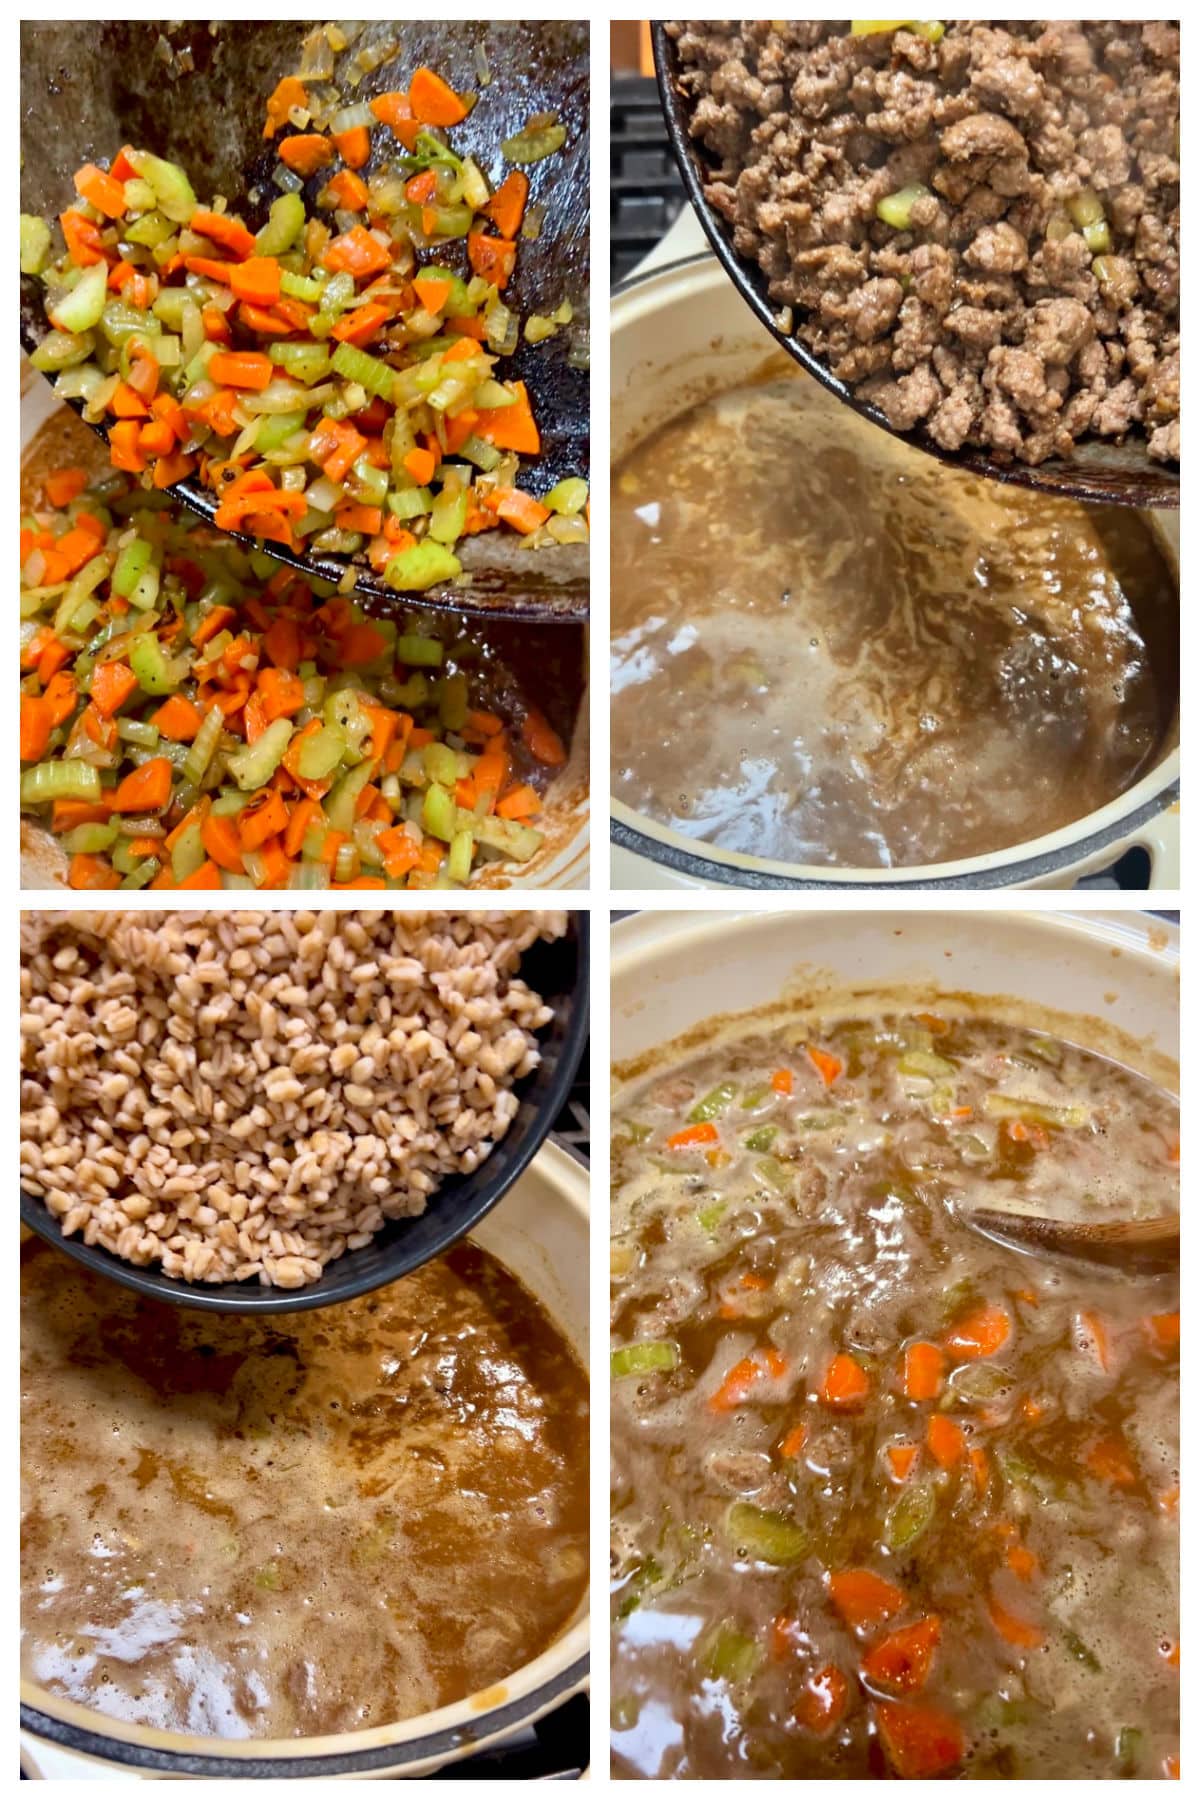 Collage adding vegetables, ground beef, barley to soup.